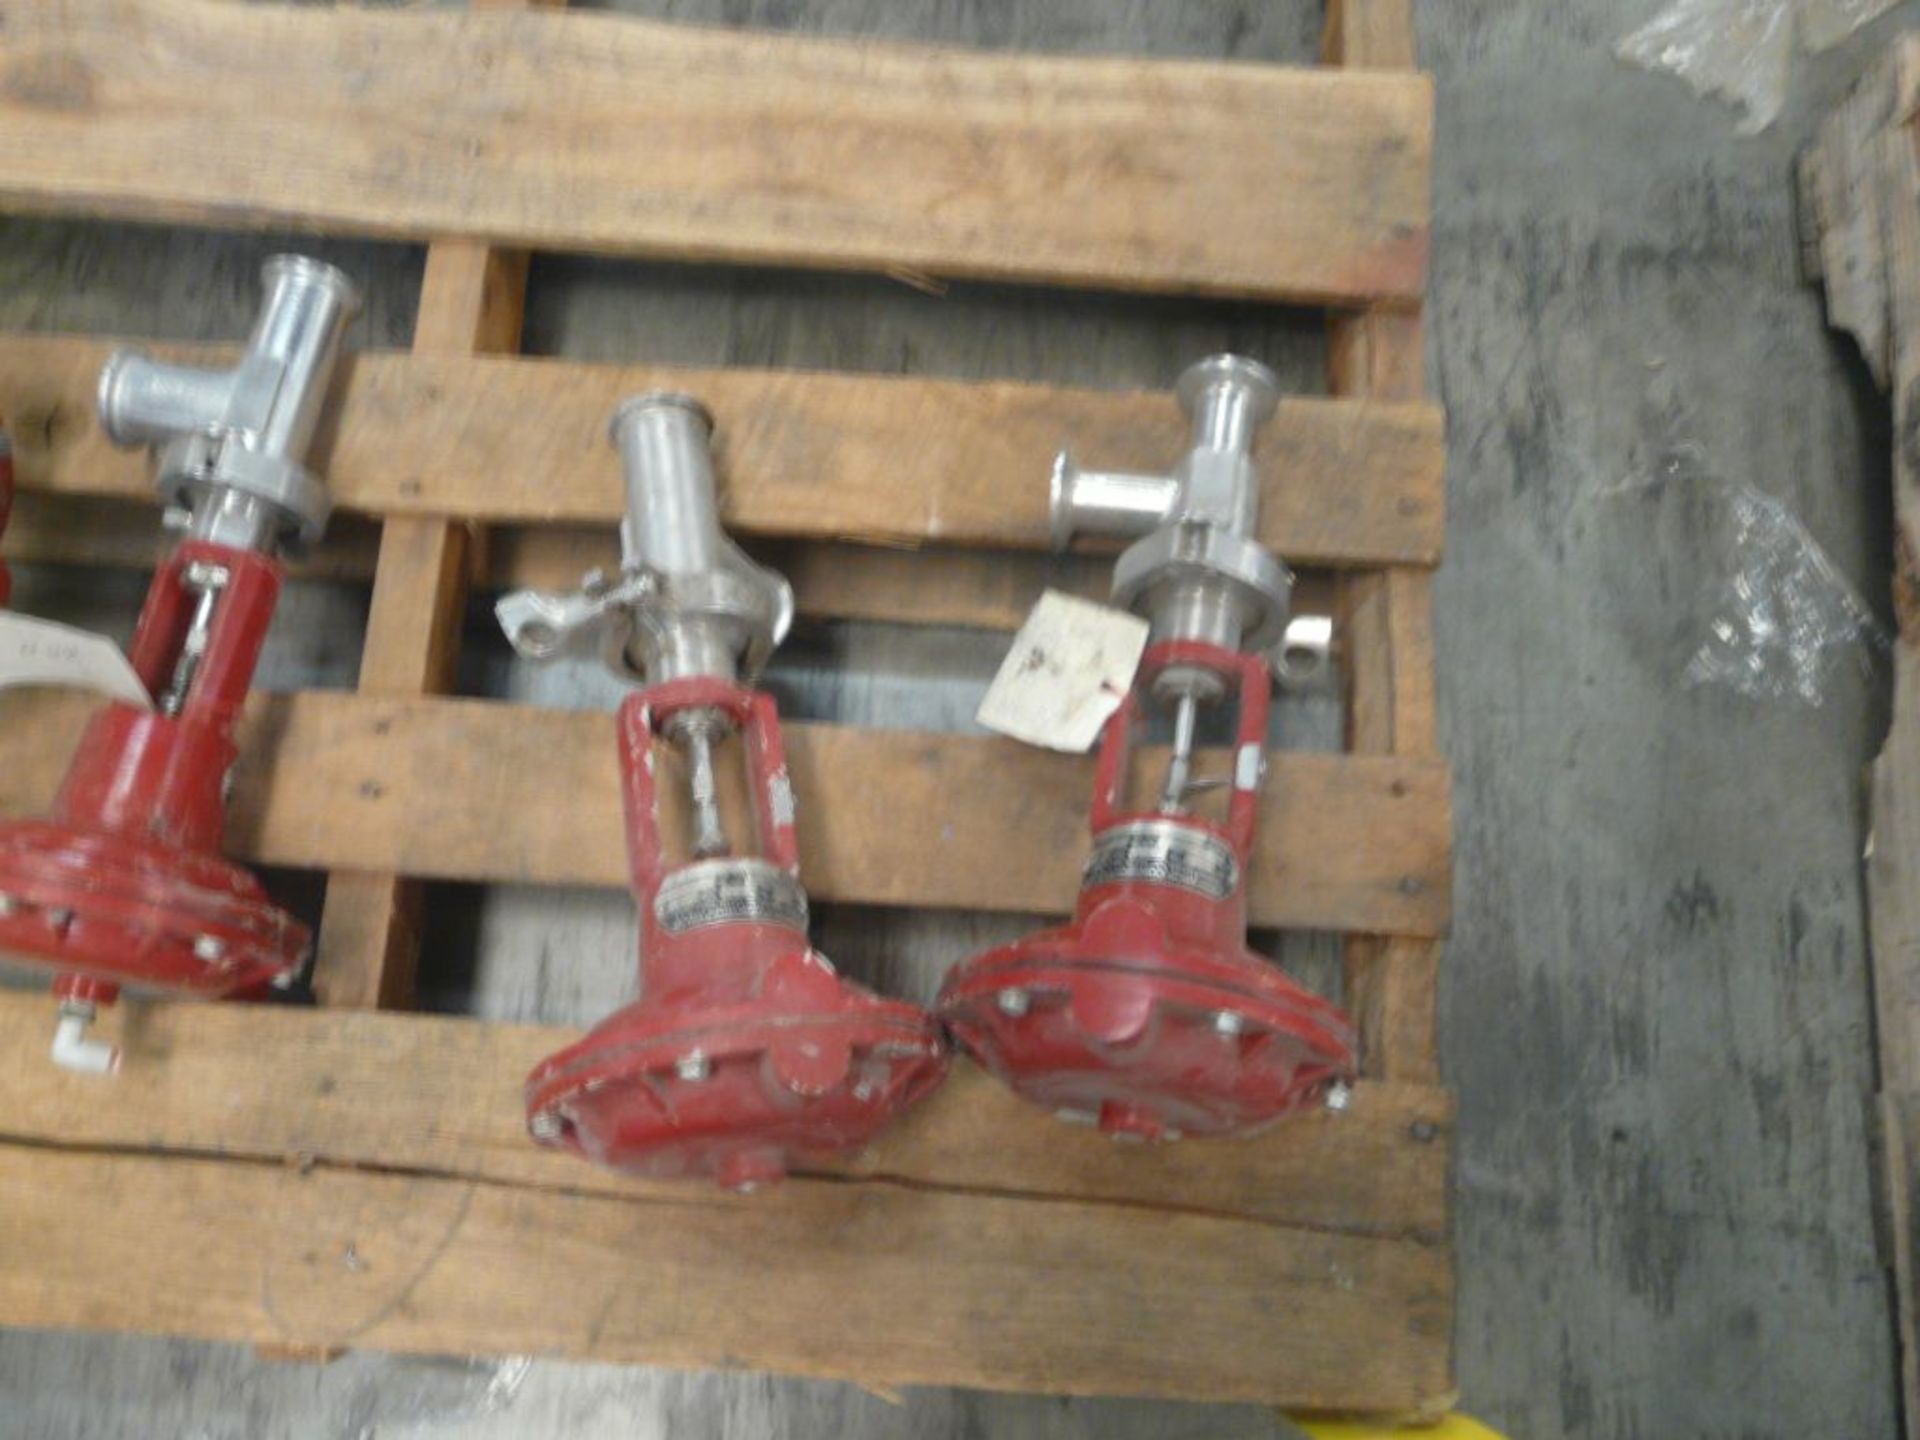 Lot of (4) Badger Meter Control Valves - Model No. 1005ASY3LY00S15L3L - Image 3 of 6